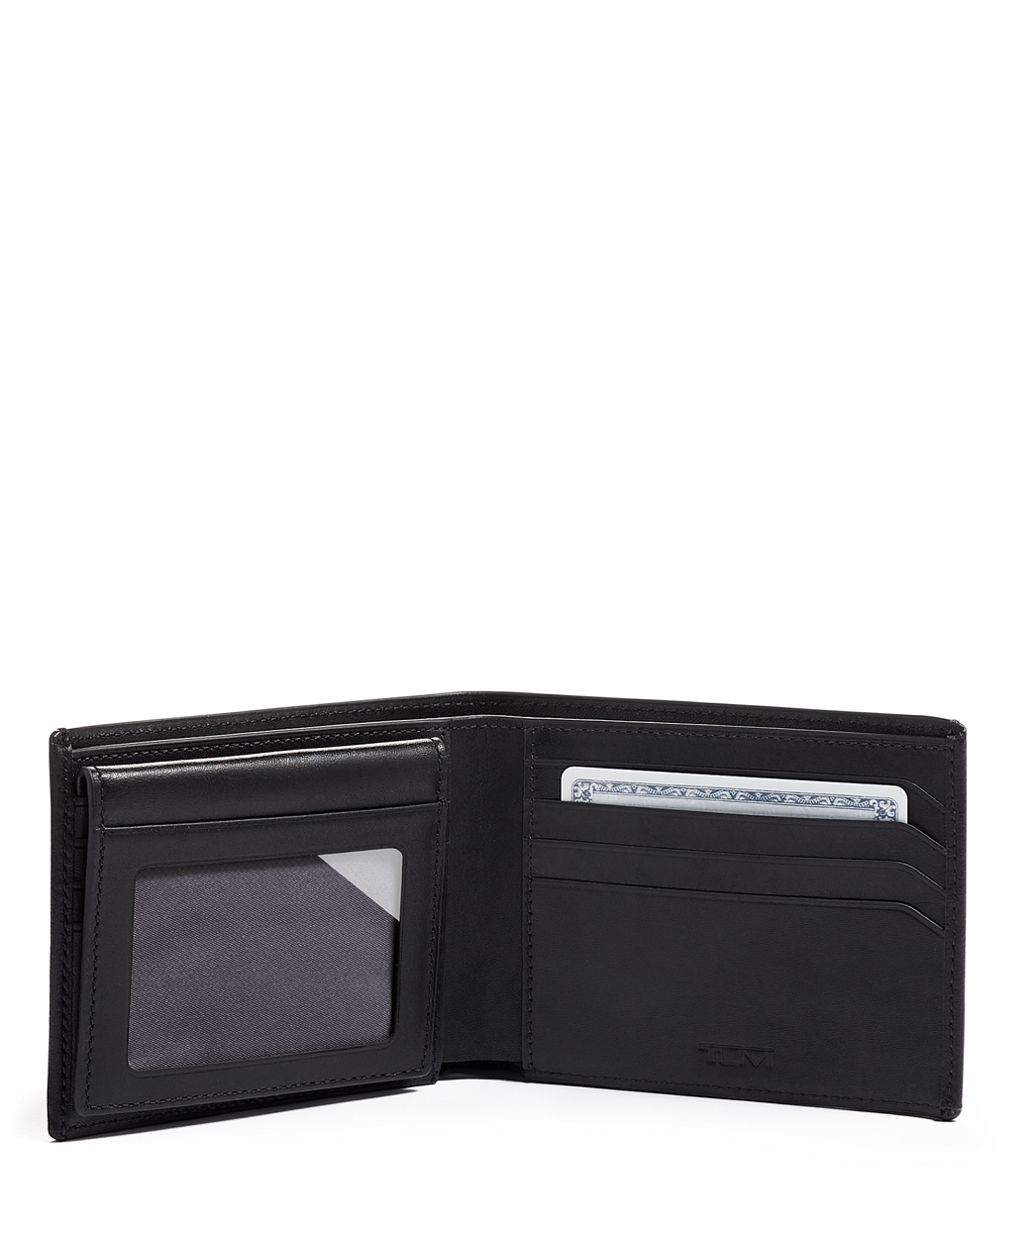 Global Removable Passcase | Tumi US